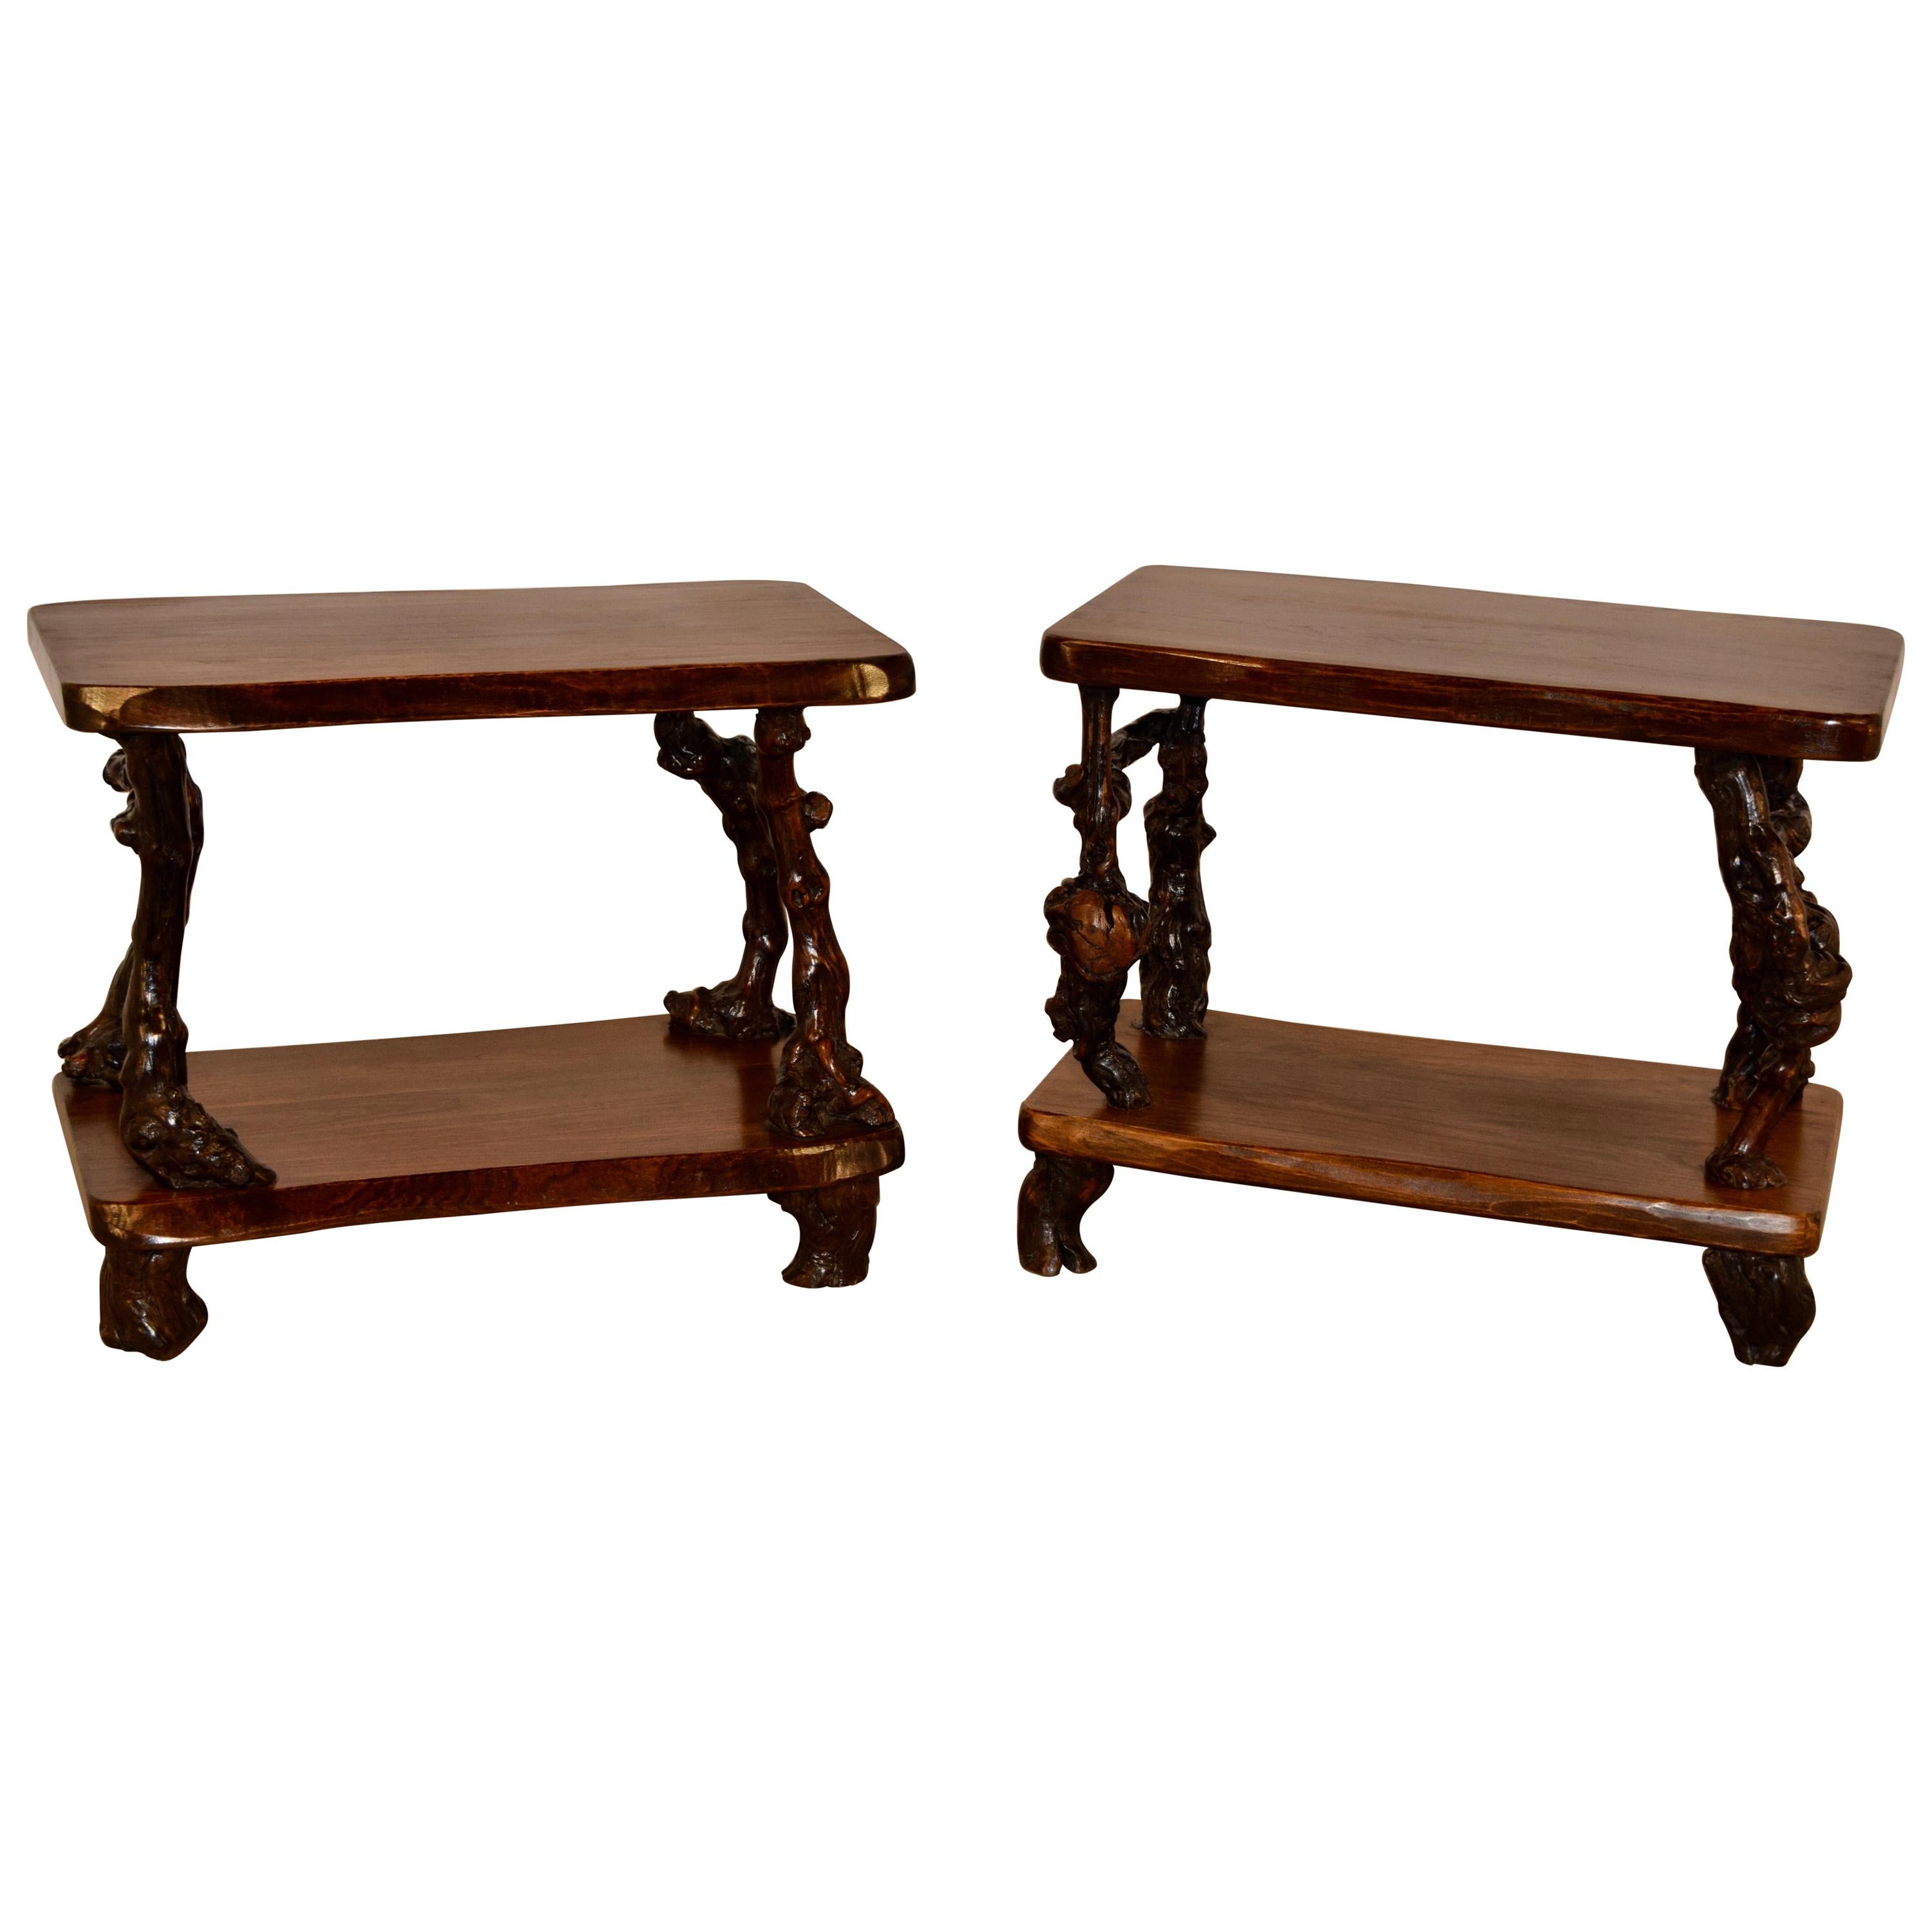 Pair of French Grapevine and Walnut Tables